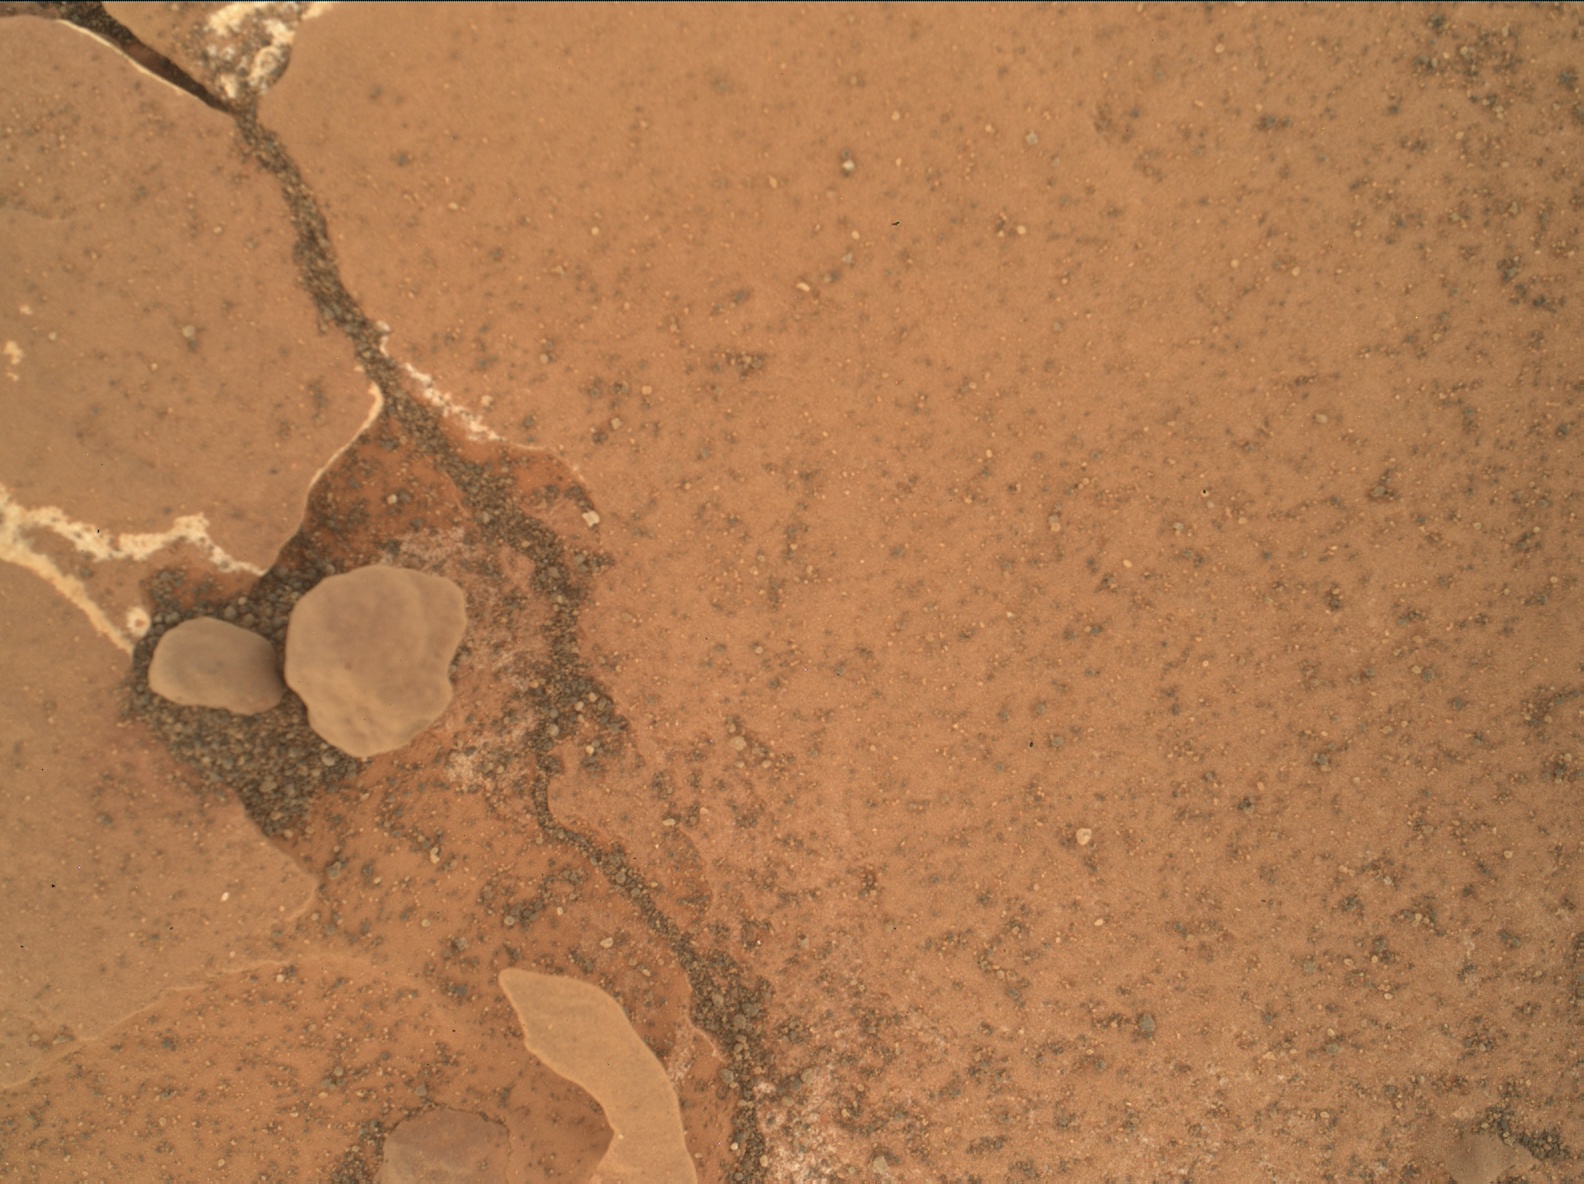 Nasa's Mars rover Curiosity acquired this image using its Mars Hand Lens Imager (MAHLI) on Sol 1782